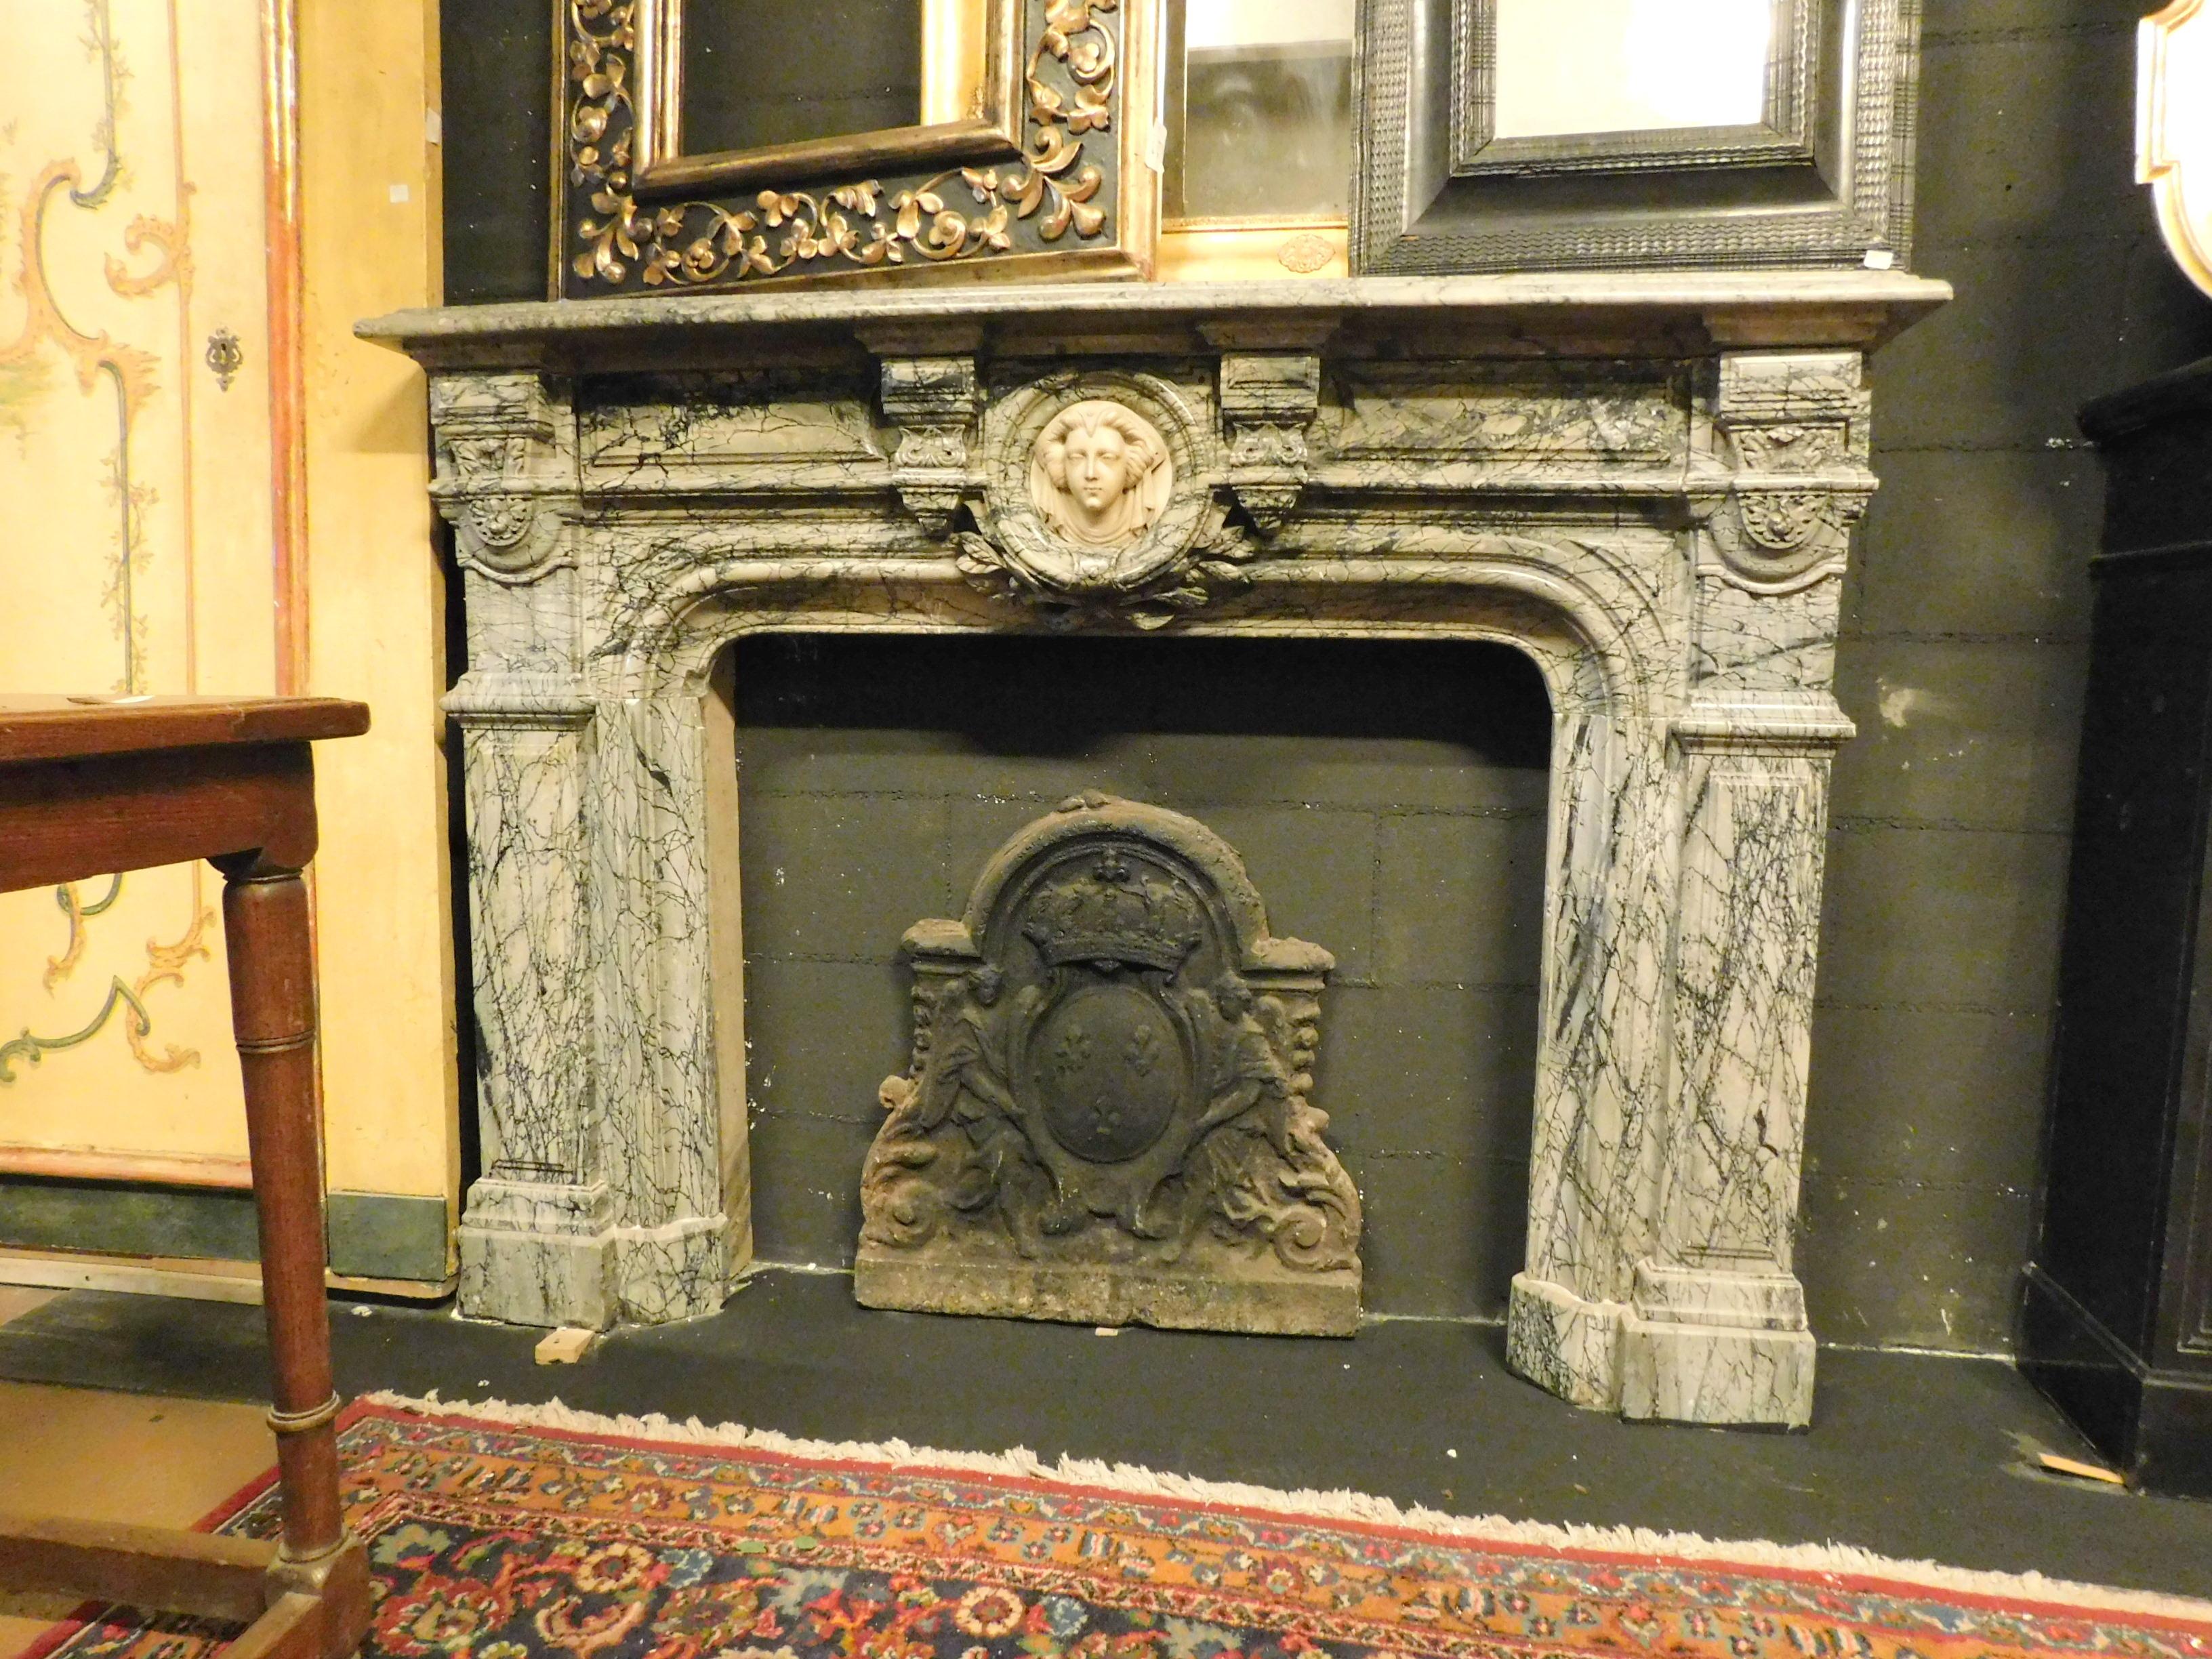 Ancient fireplace in gray neoclassical marble with white Carrara marble face, very precious, probably the face was of the woman loved by the owner of the building or the Countess.
Dating from the beginning of the 1800s, it comes from an Italian